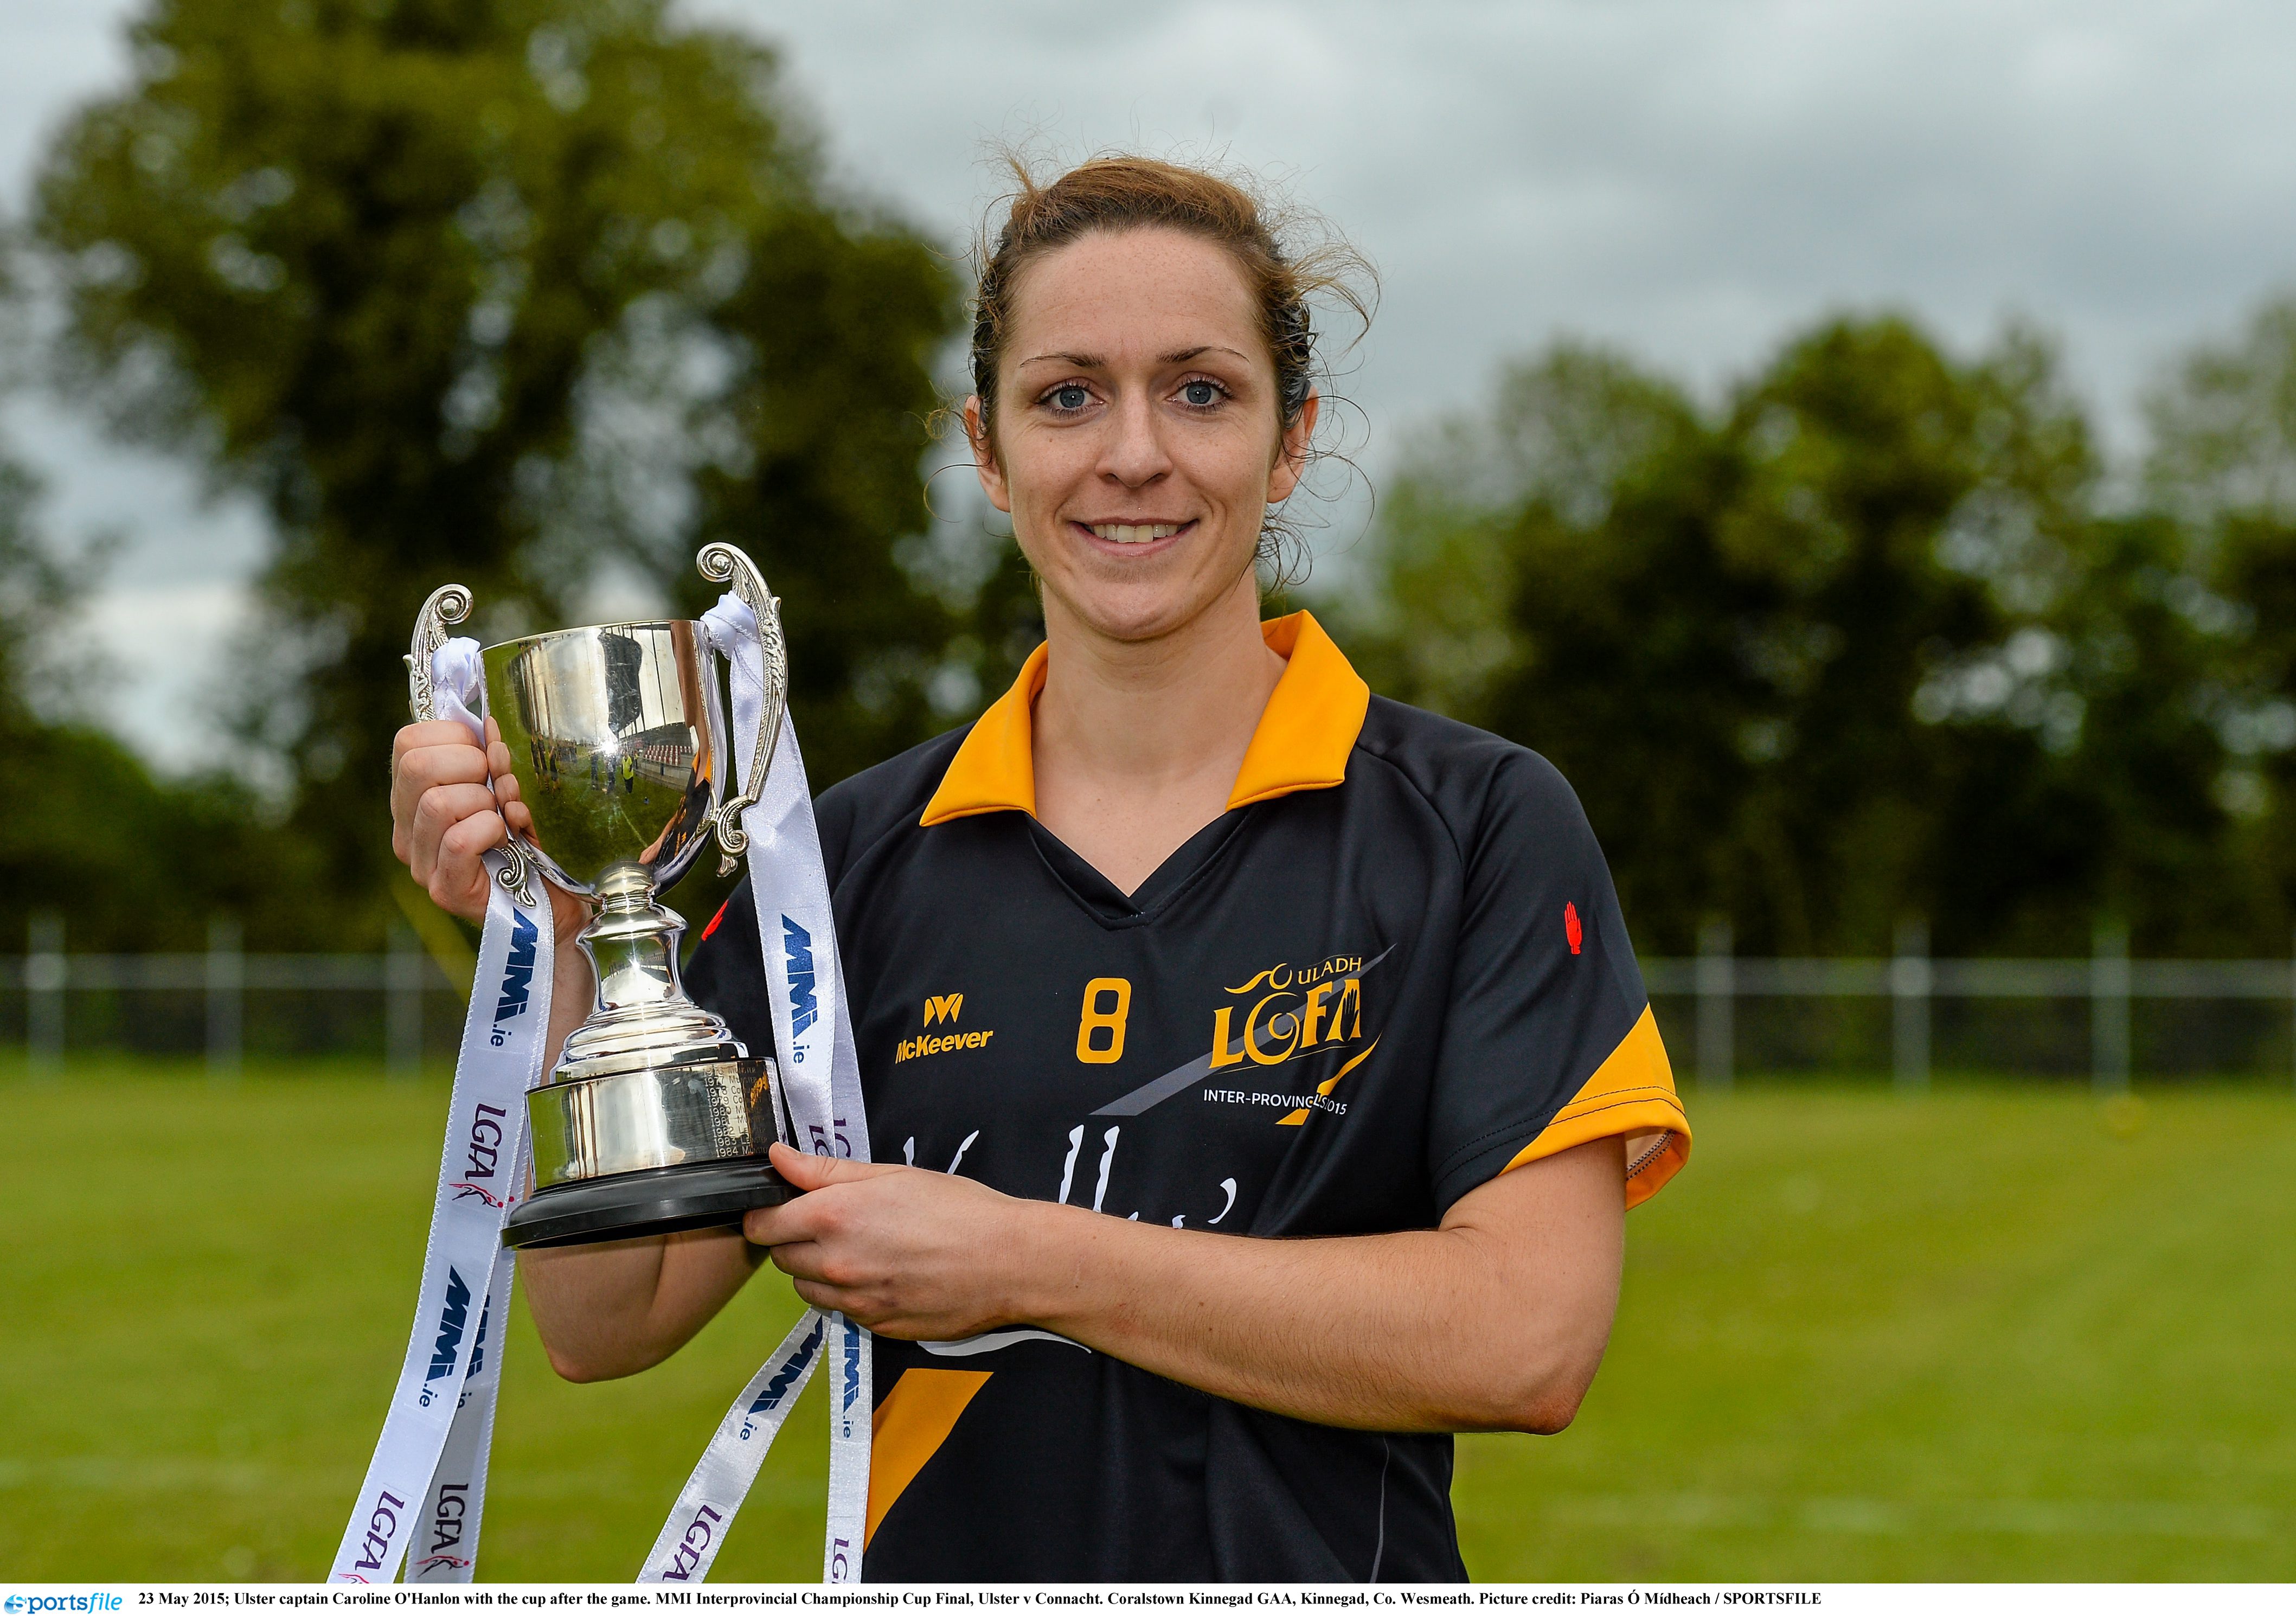 23 May 2015; Ulster captain Caroline O'Hanlon with the cup after the game. MMI Interprovincial Championship Cup Final, Ulster v Connacht. Coralstown Kinnegad GAA, Kinnegad, Co. Wesmeath. Picture credit: Piaras Ó Mídheach / SPORTSFILE